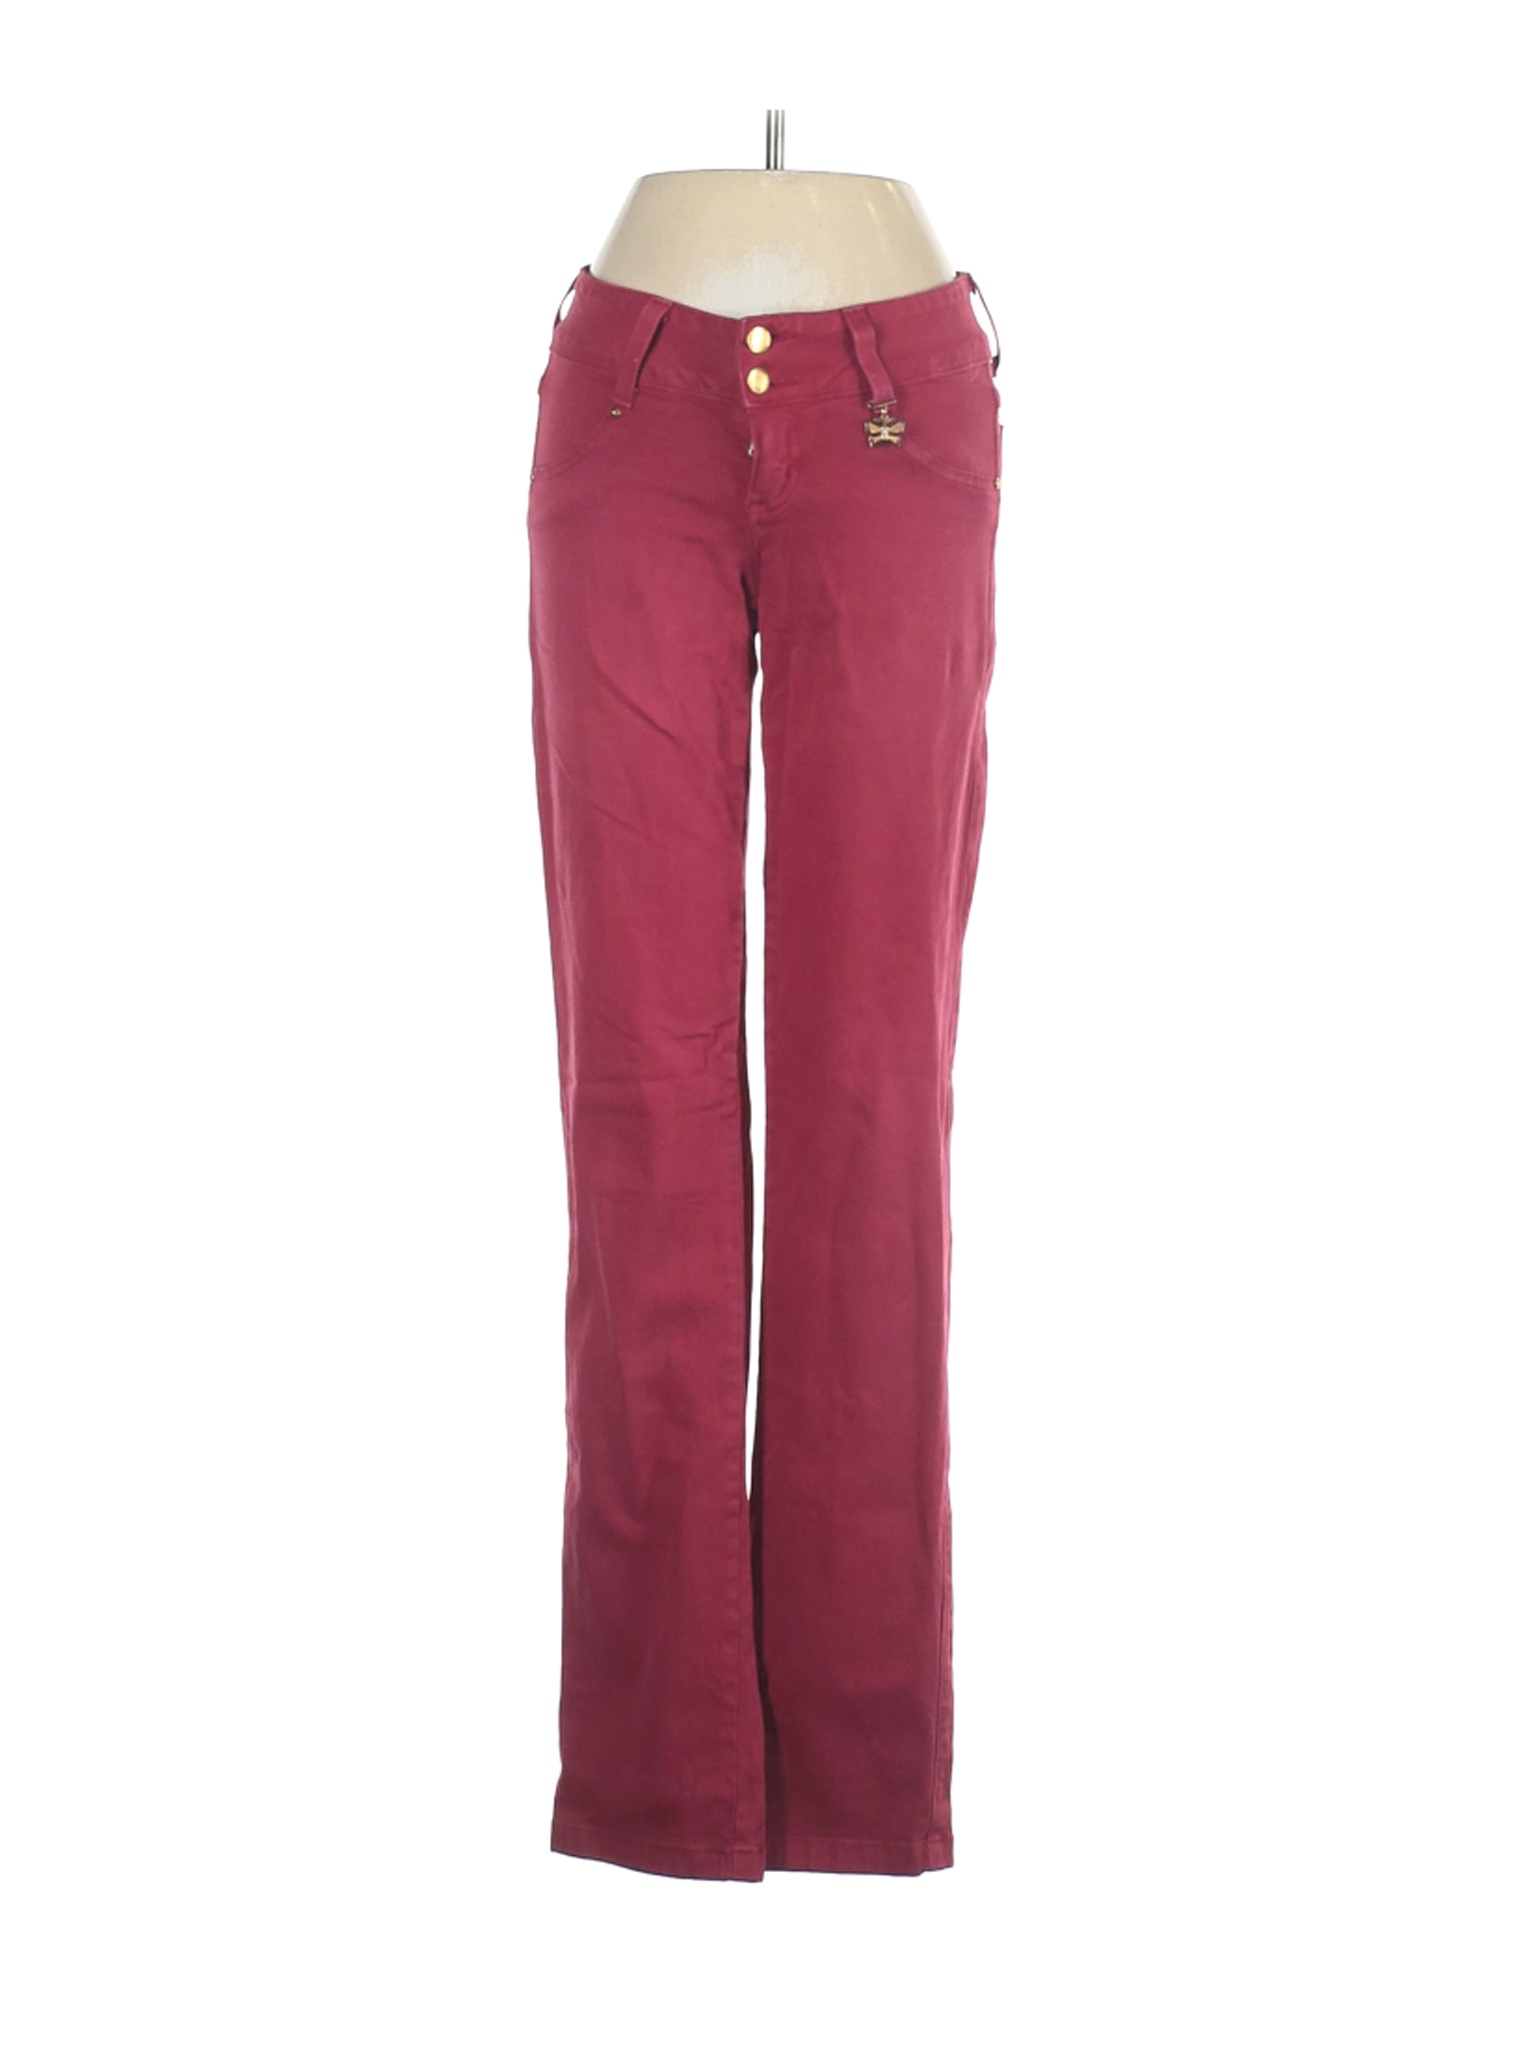 Assorted Brands Women Red Casual Pants 36 eur | eBay